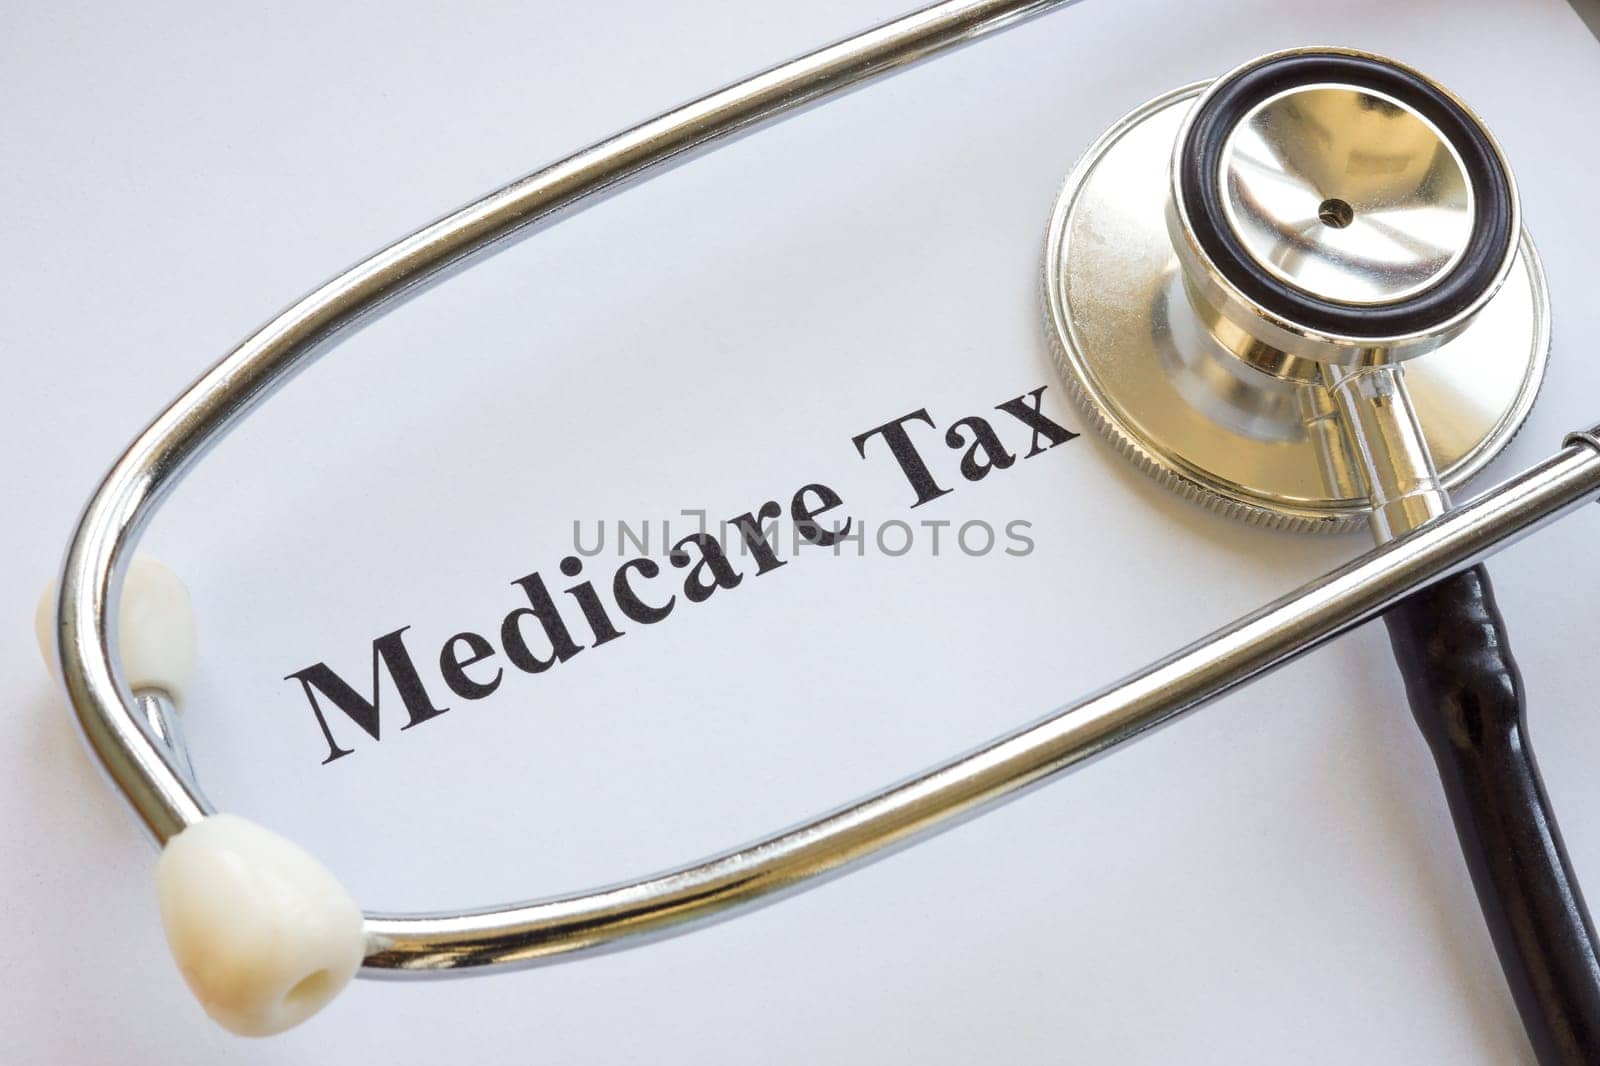 Document about Medicare tax and stethoscope. by designer491